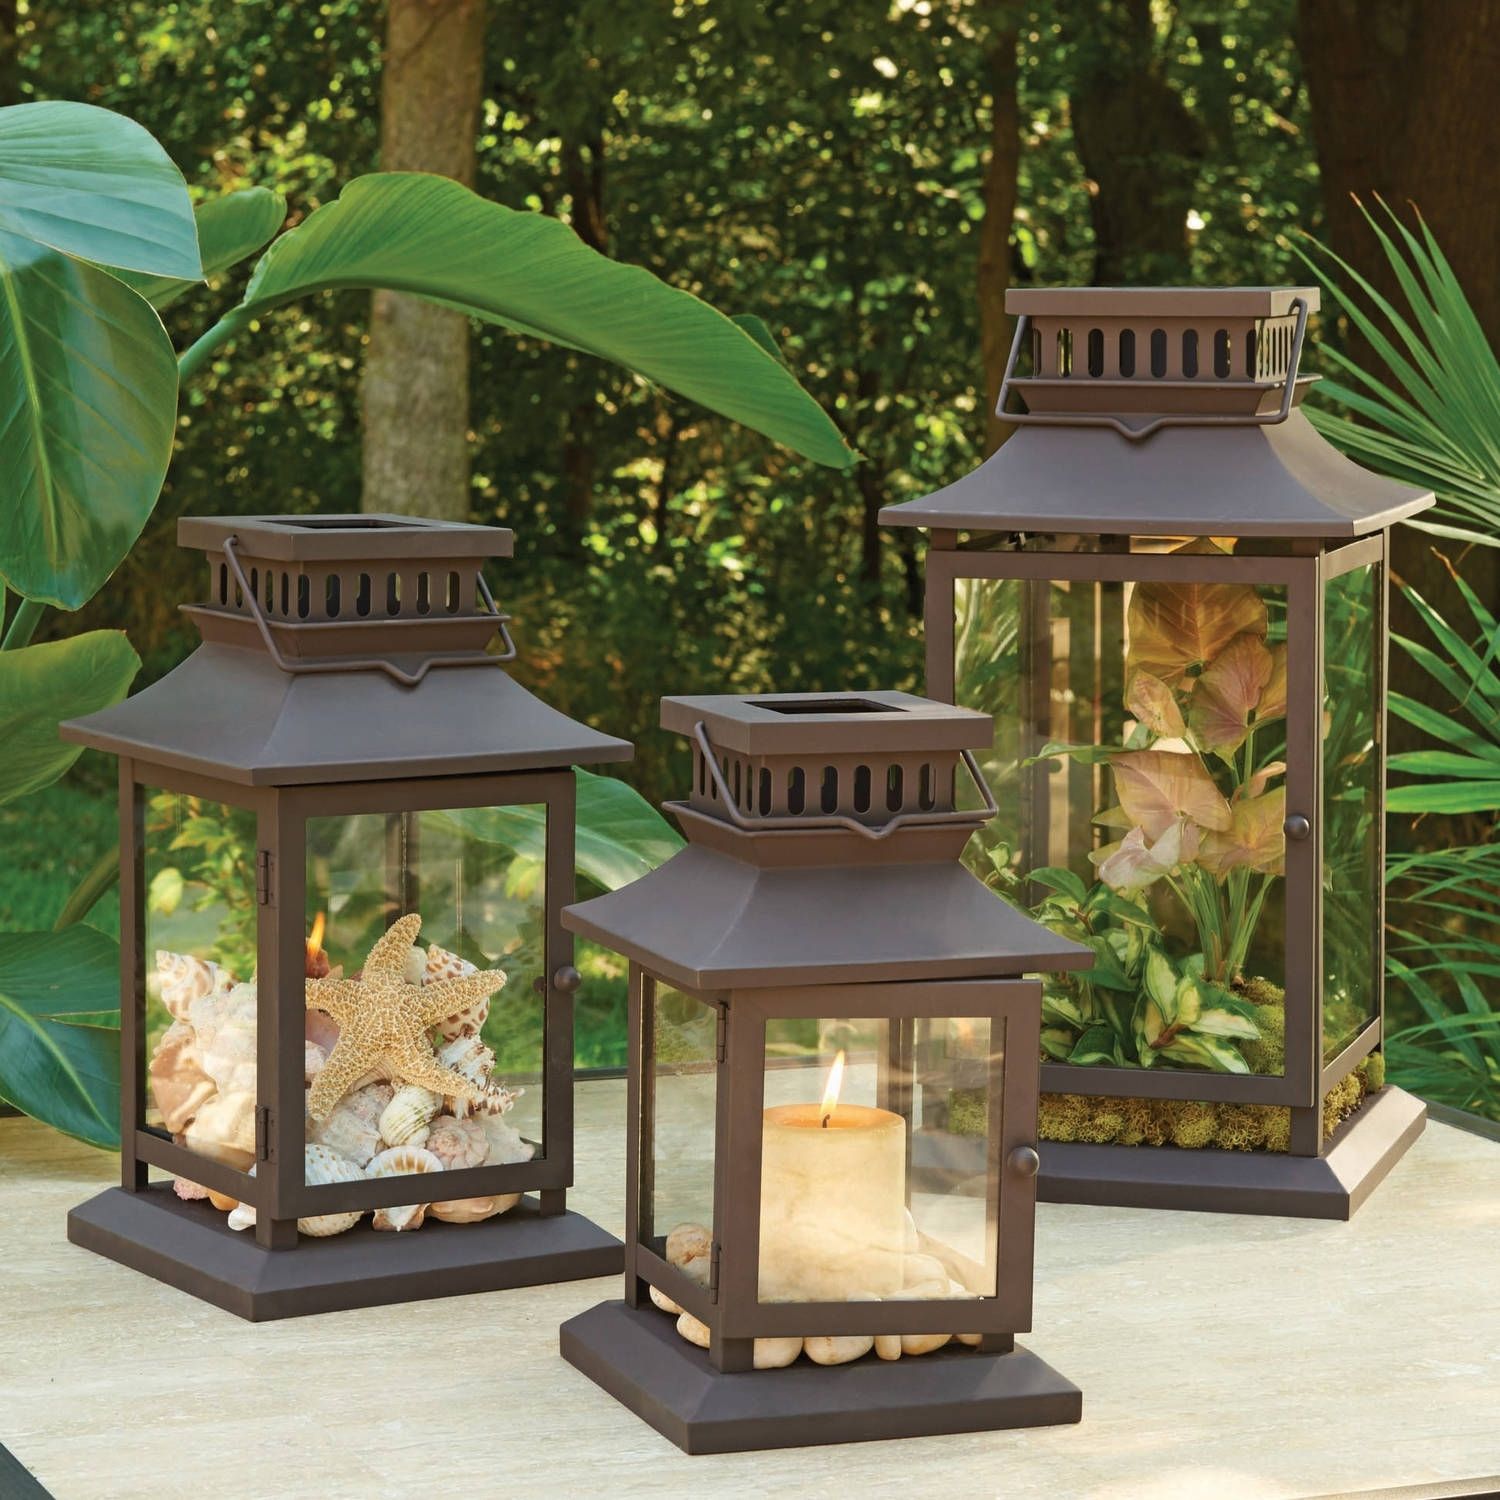 Better Homes And Gardens Square Metal Outdoor Lantern – Walmart For Walmart Outdoor Lanterns (View 4 of 20)